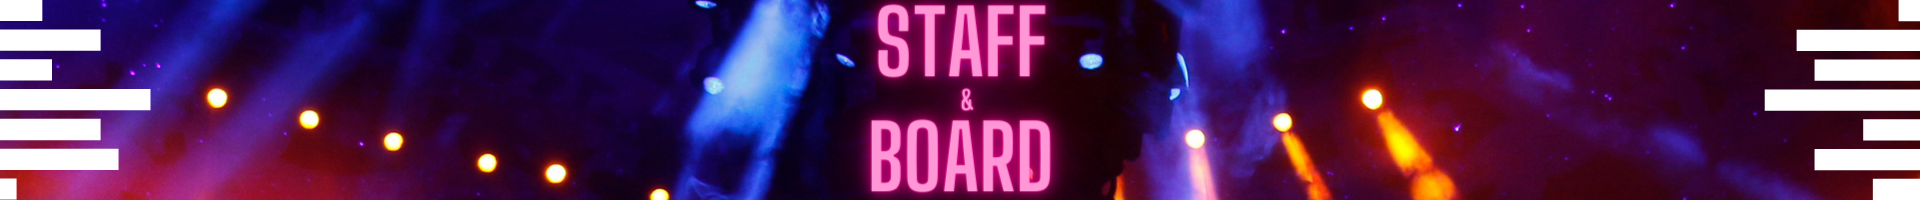 Meet our Staff & Board